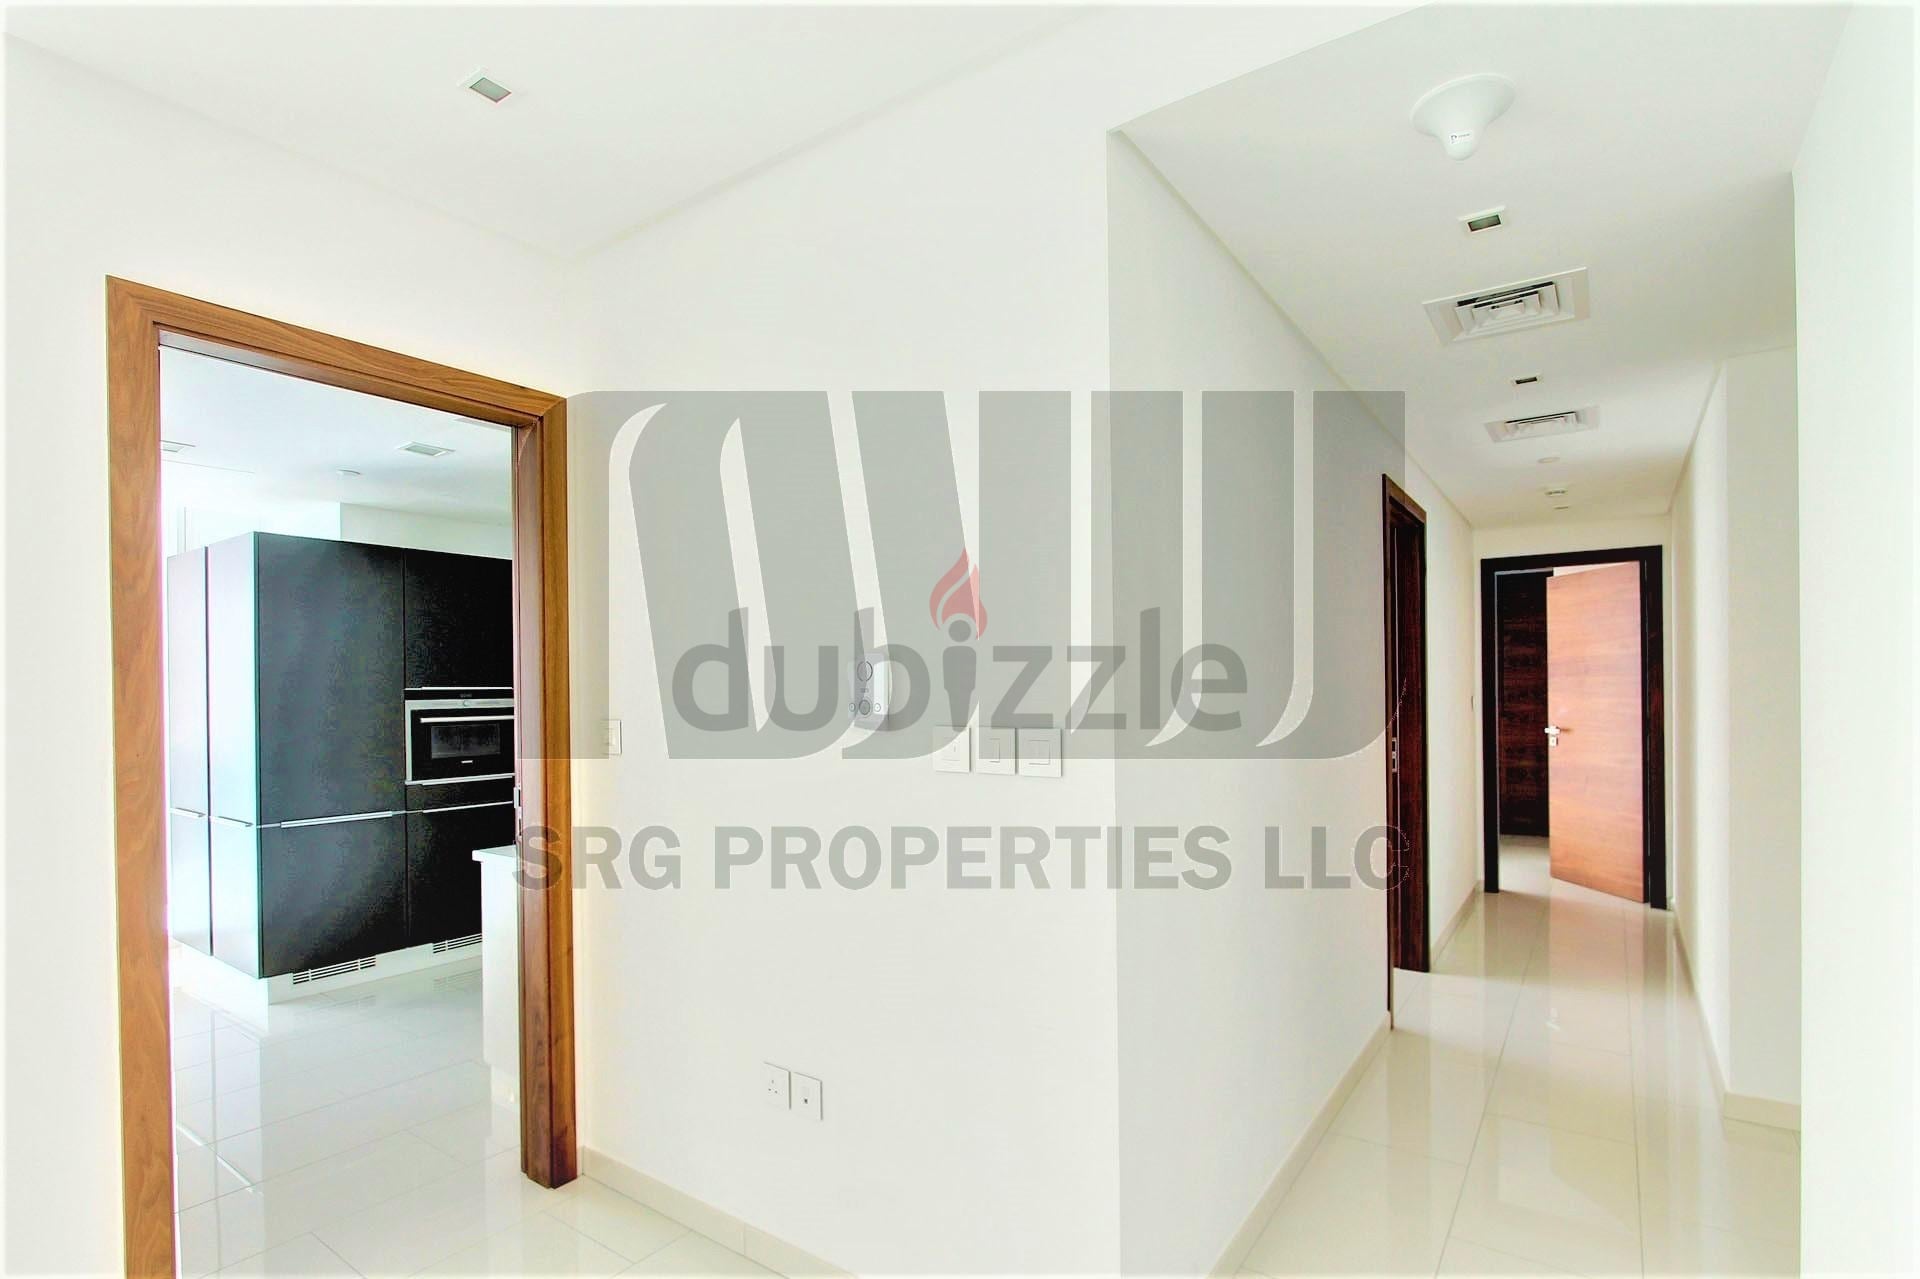 2br Huge Balcony, Trade Centre 1 @aed140k/-yr. Upcoming.